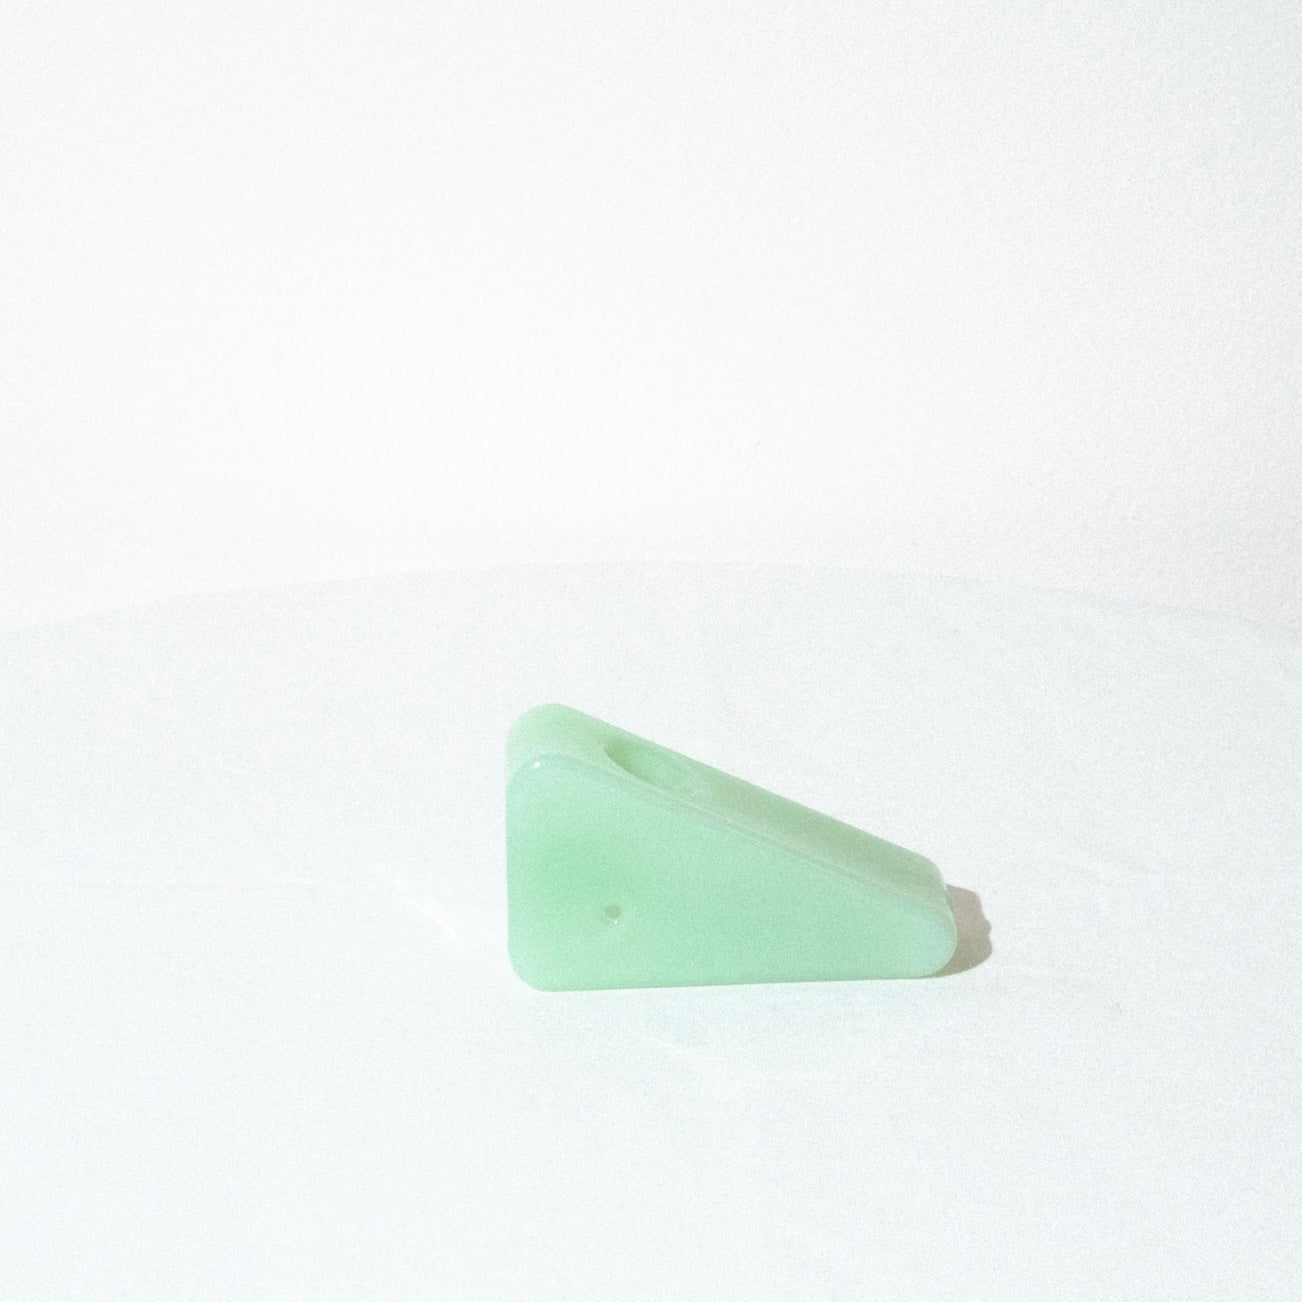 the yew yew triangle pipe in opaque green, side view which features the carb hole.